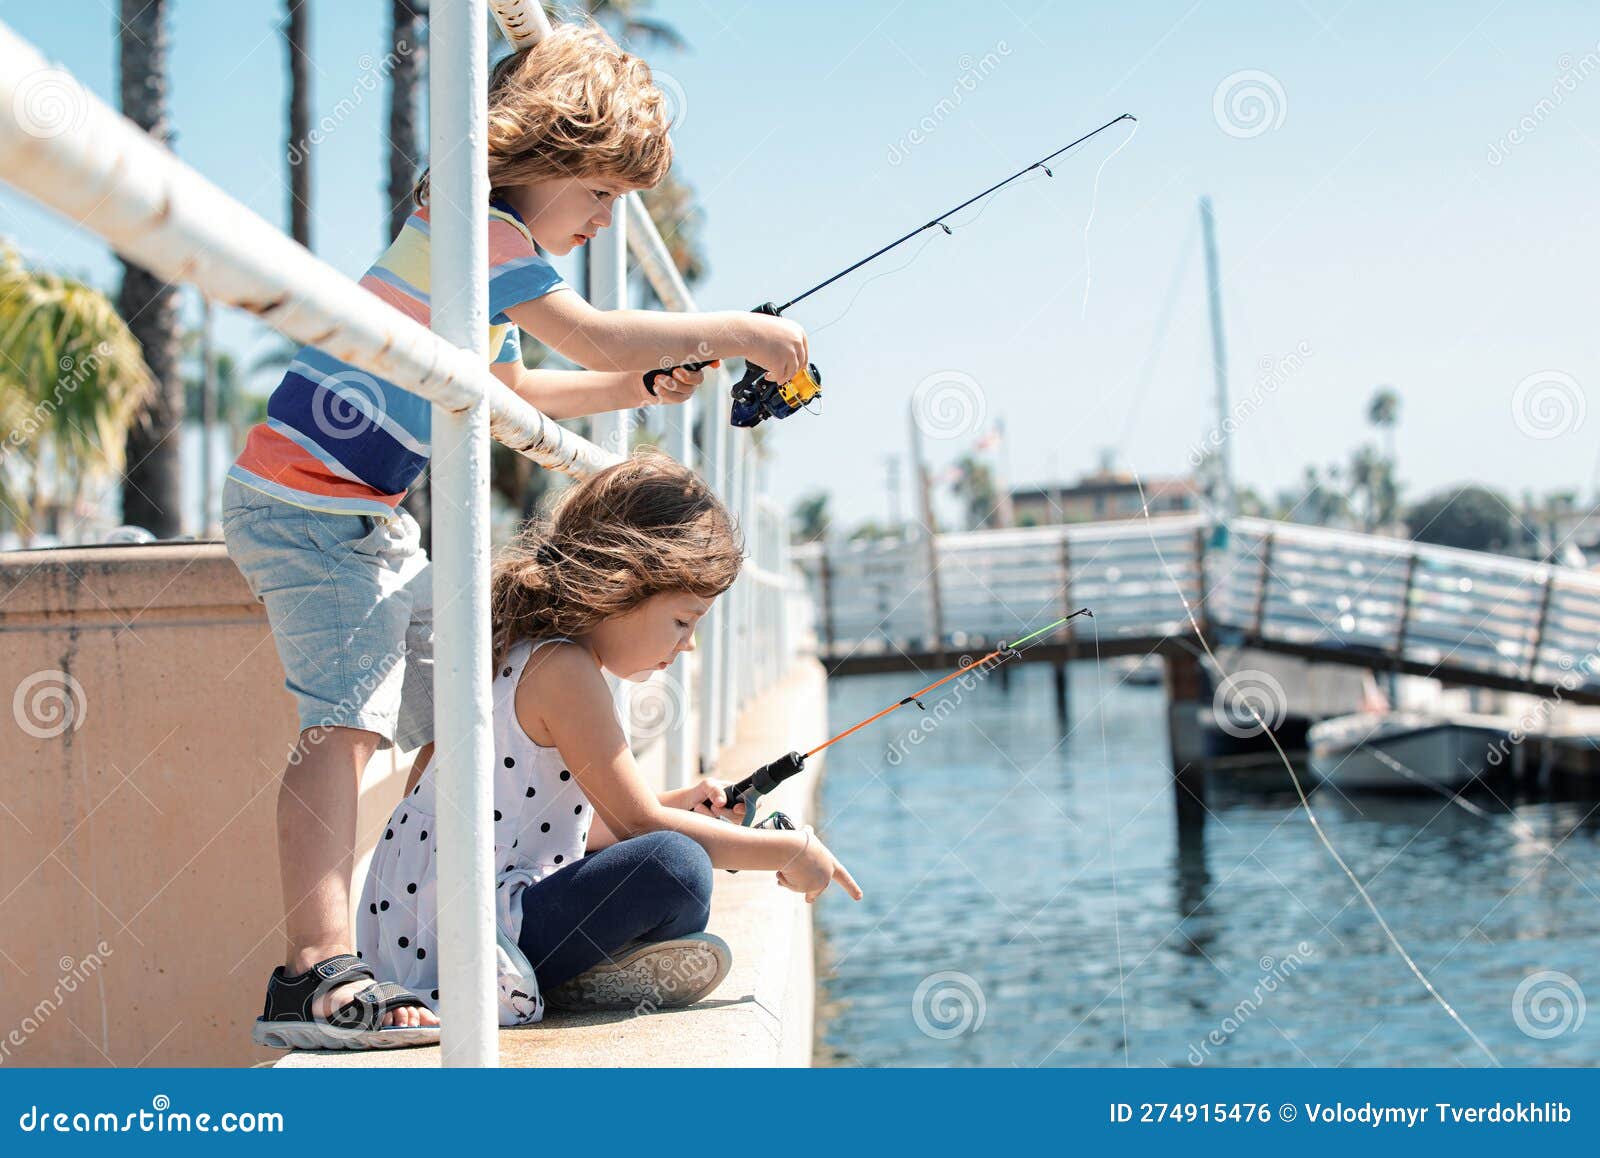 Couple of Kids Fishing on Pier. Child at Jetty with Rod. Boy and